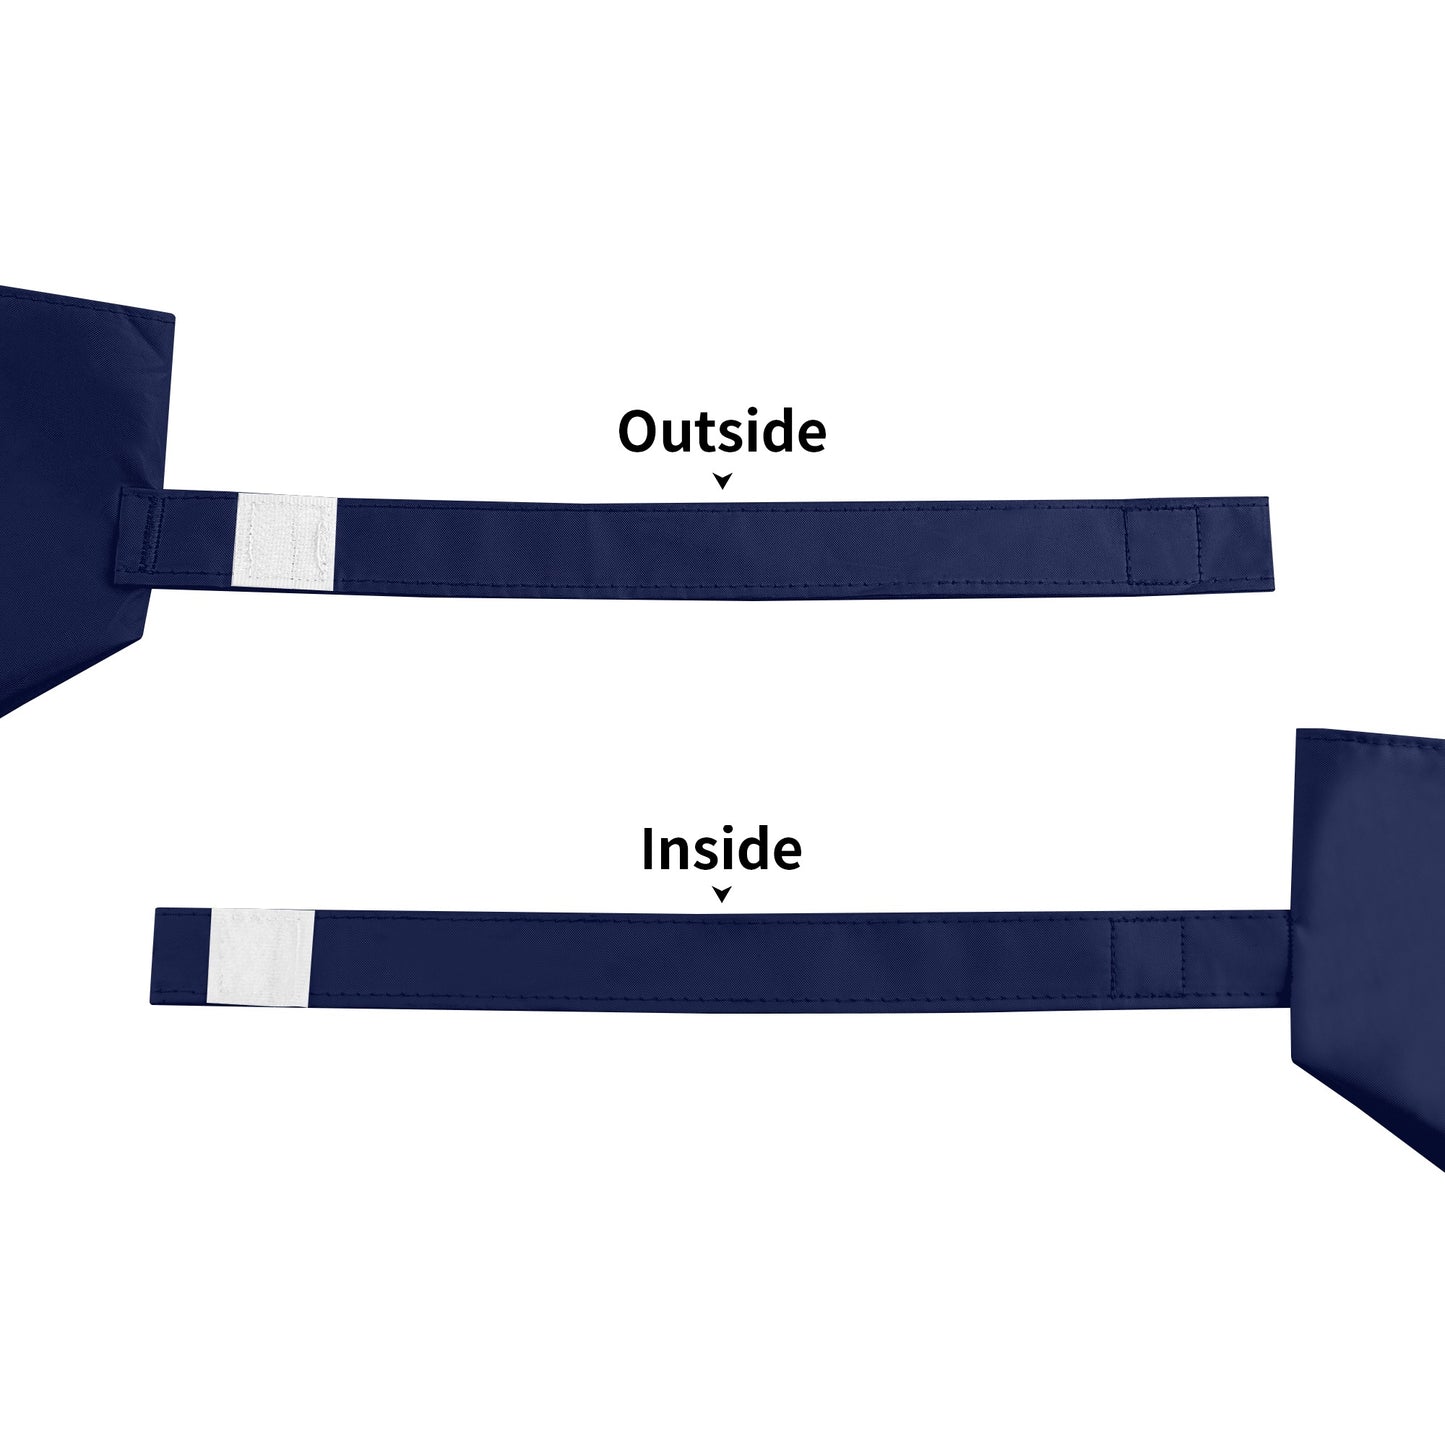 Umbrella Lightweight Auto Open & Close  - Real Logo on Navy and White